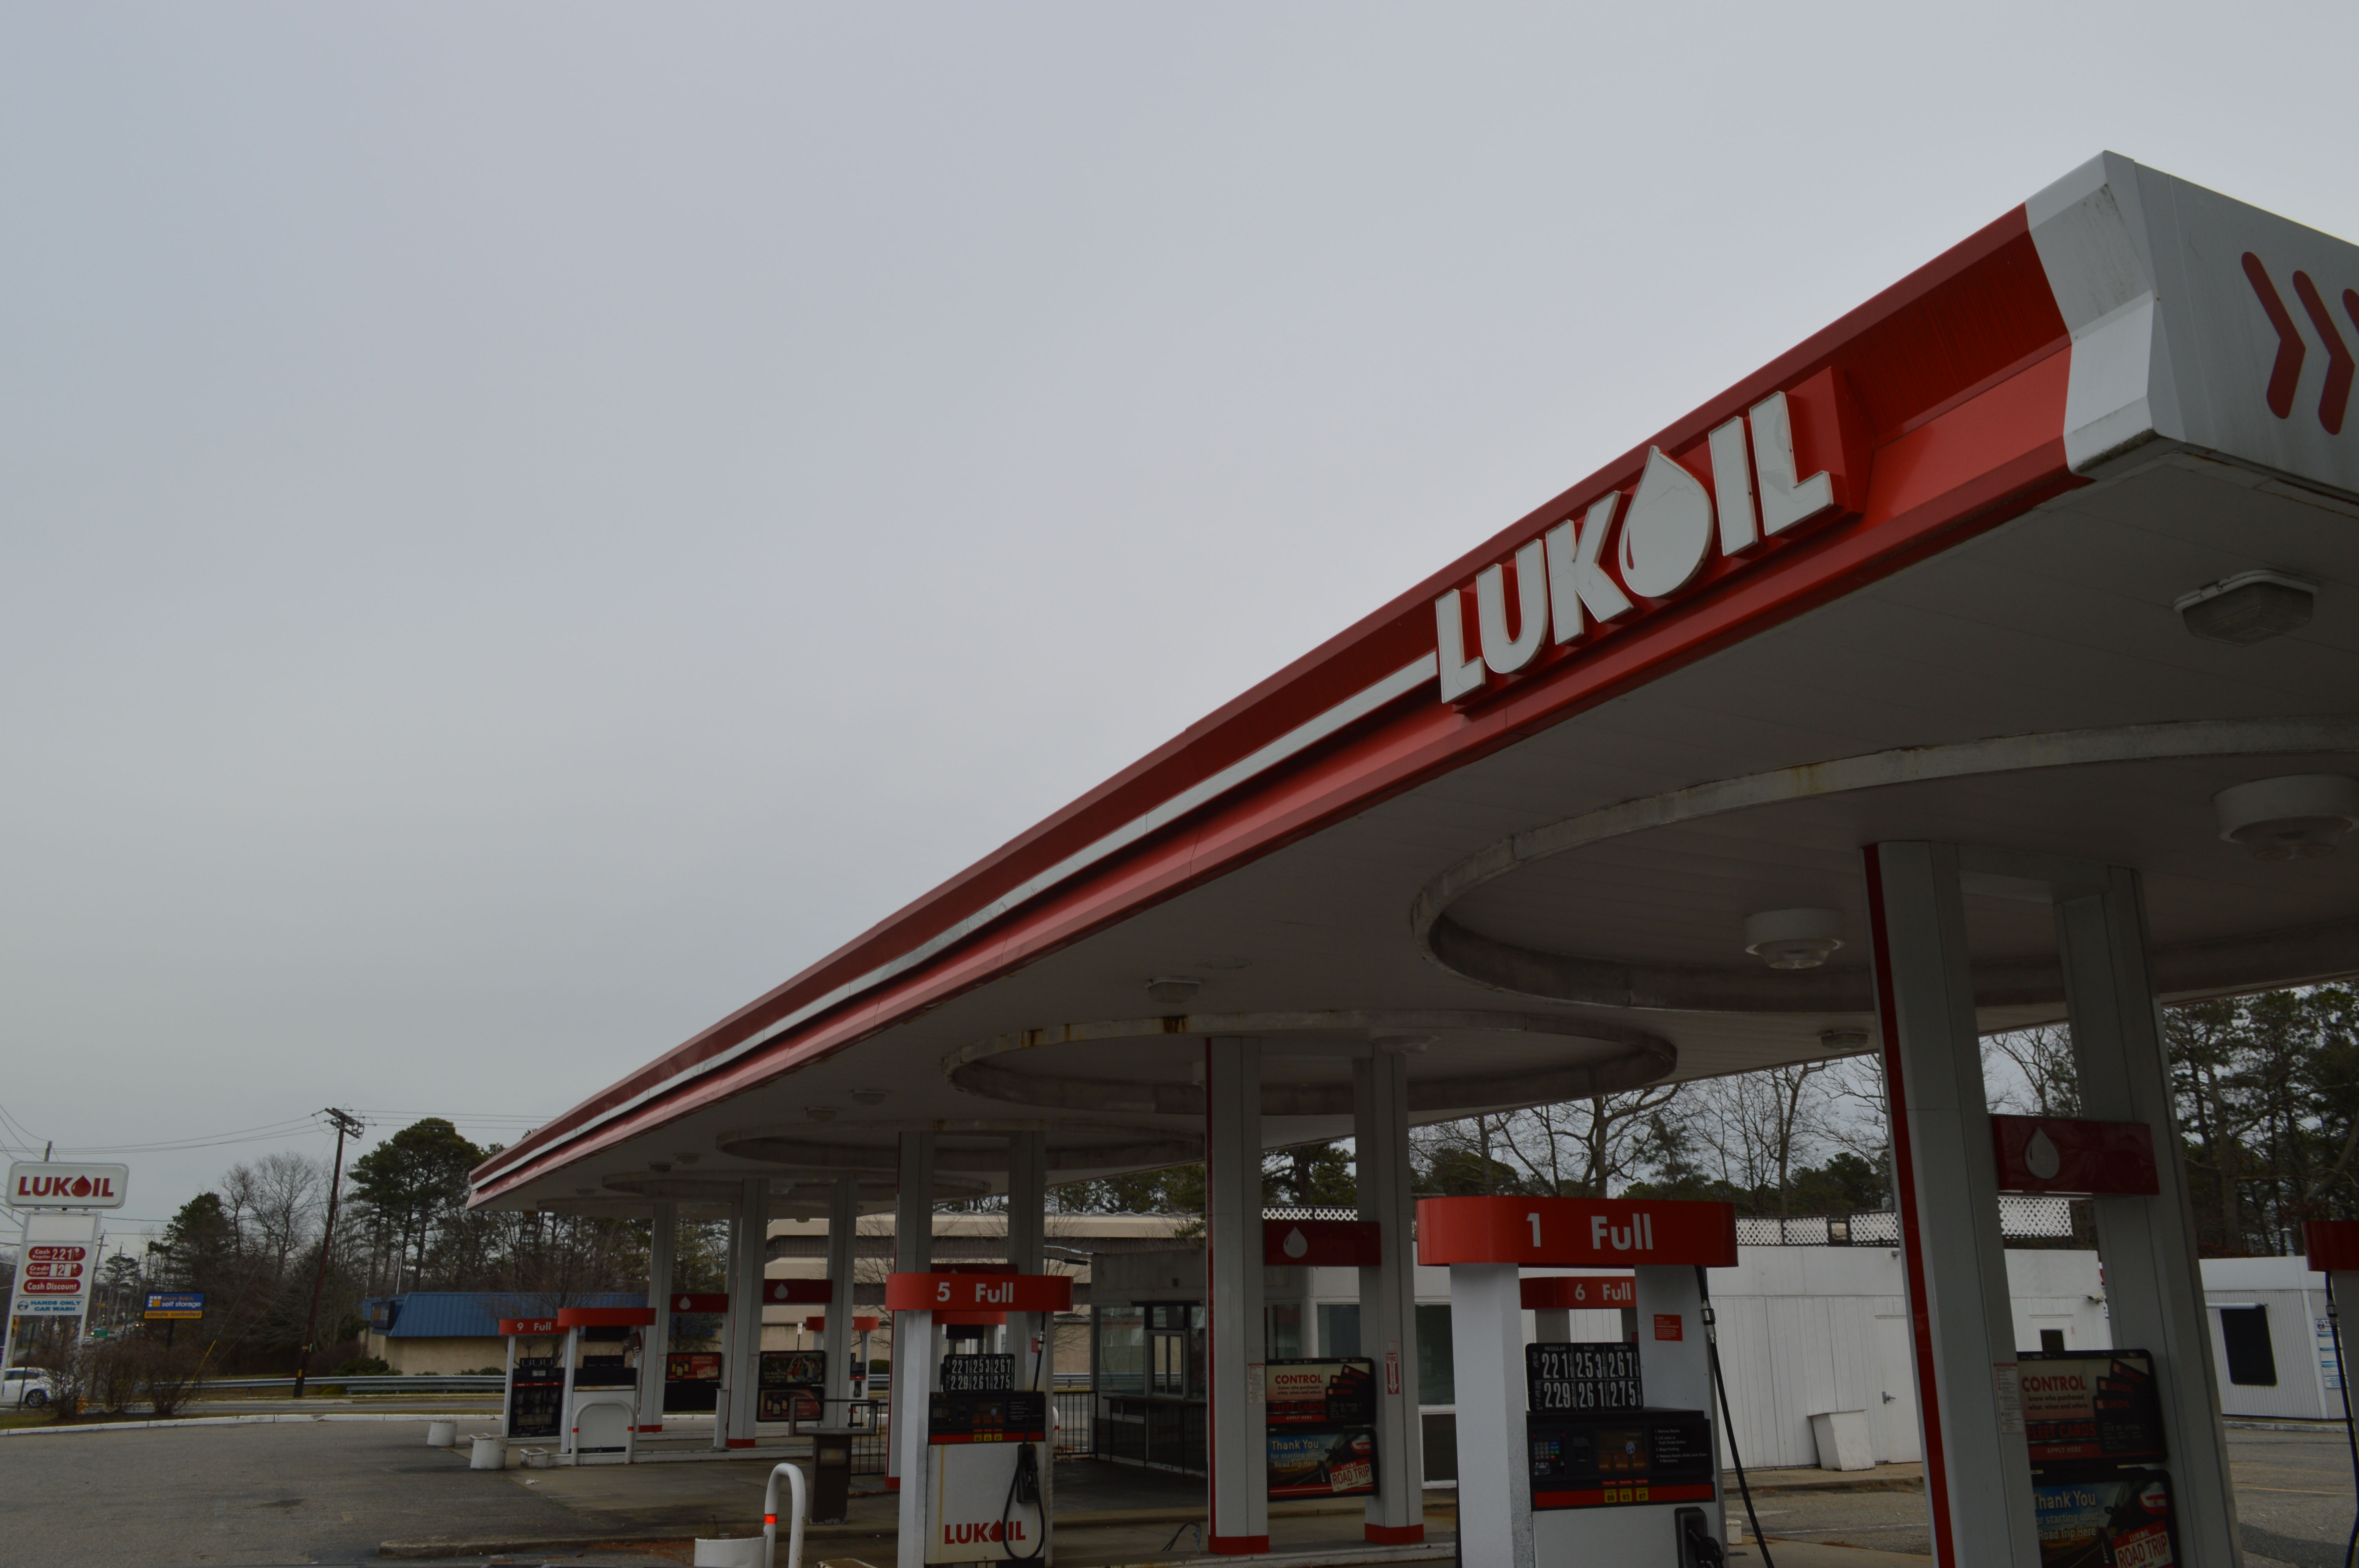 The Lukoil station at Route 88 and Jordan Road. (Photo: Daniel Nee)